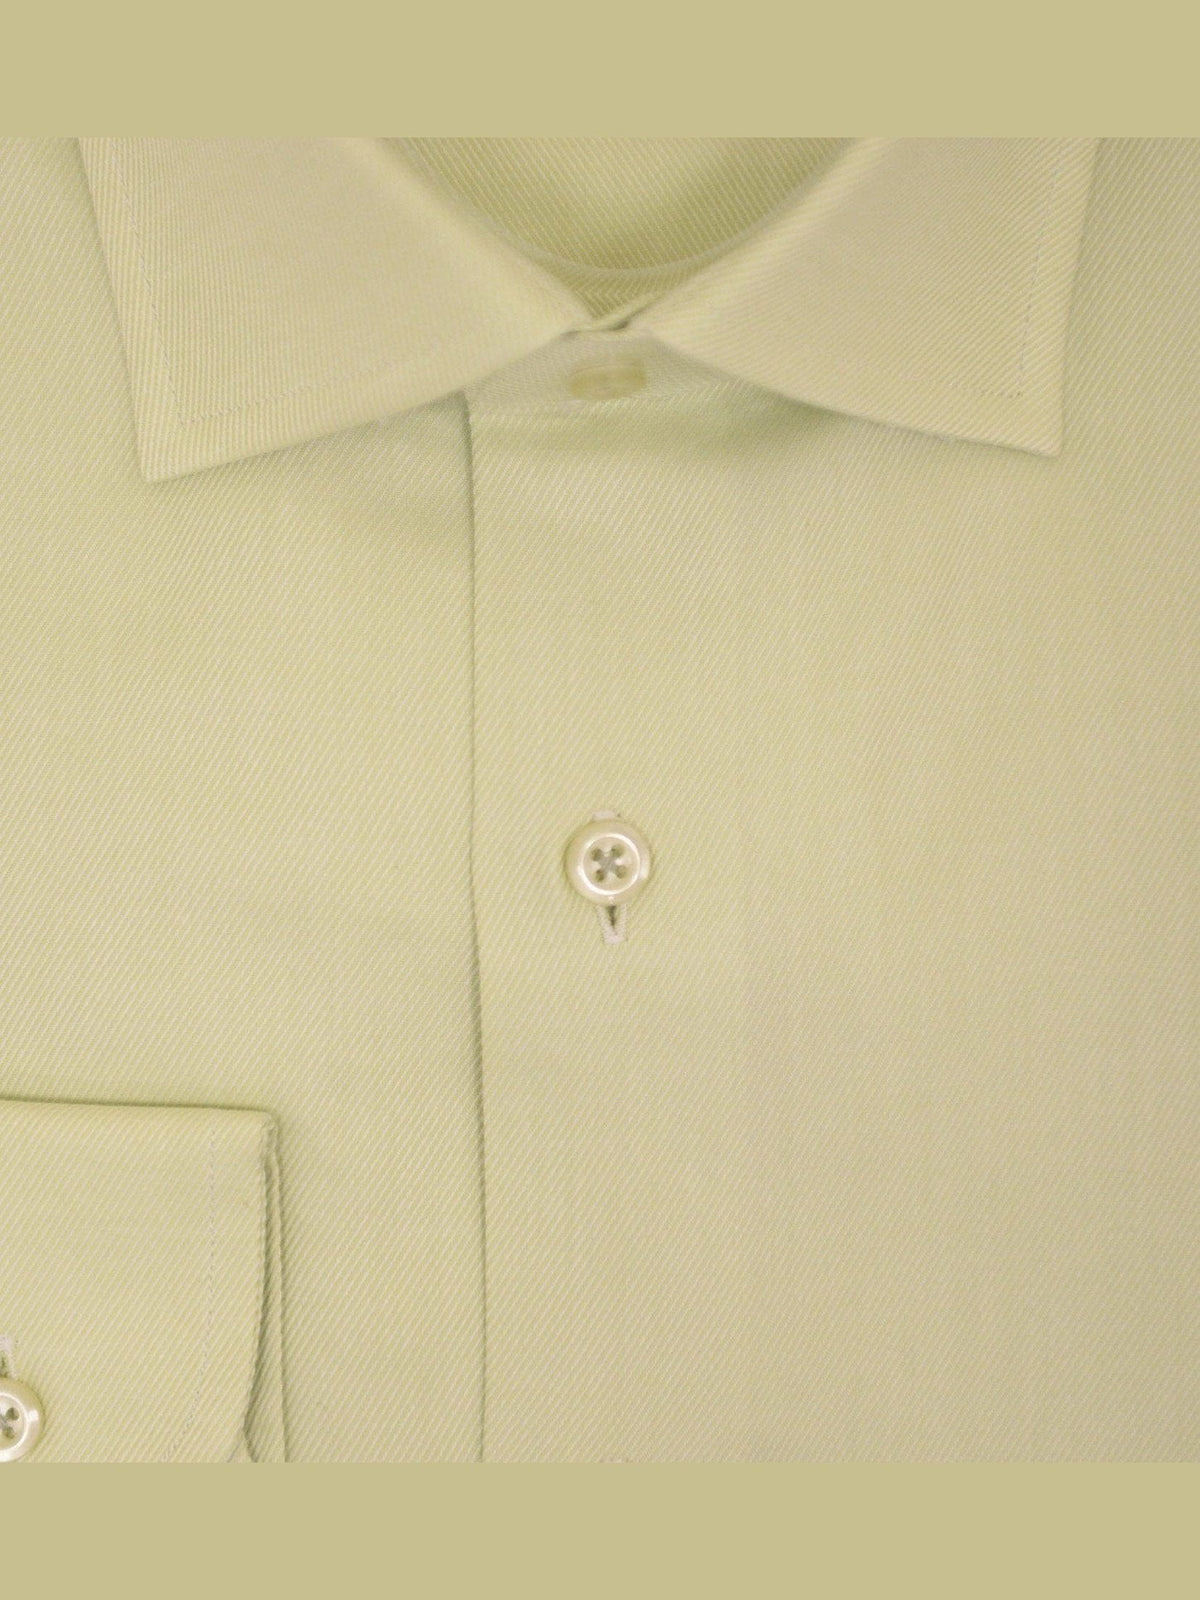 Mens Slim Fit Solid Lime Green Twill Spread Collar Cotton Dress Shirt - The Suit Depot